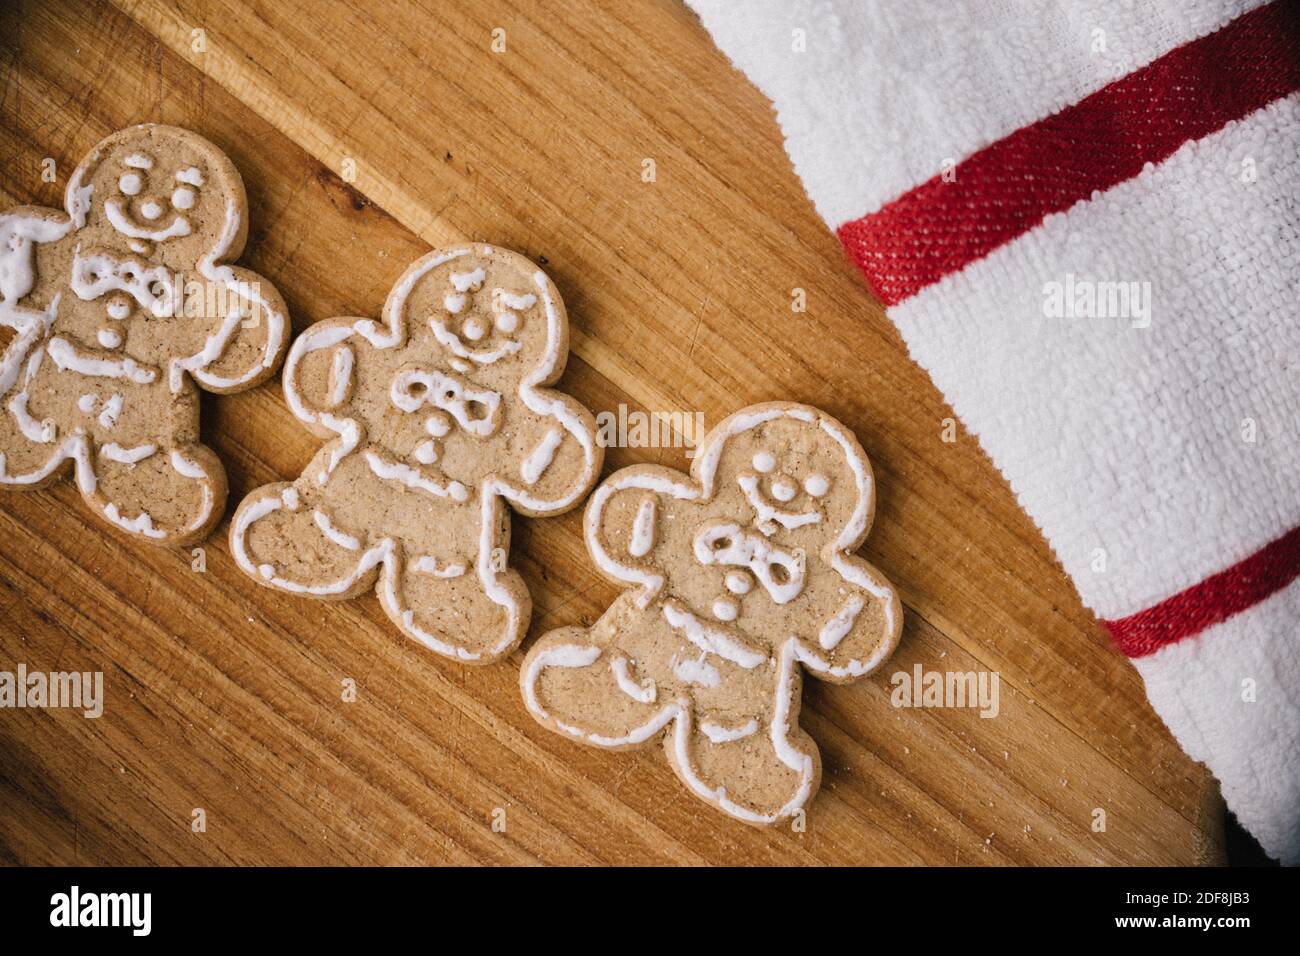 Christmas Gingerbread Man Cookies on Wooden Board Stock Photo